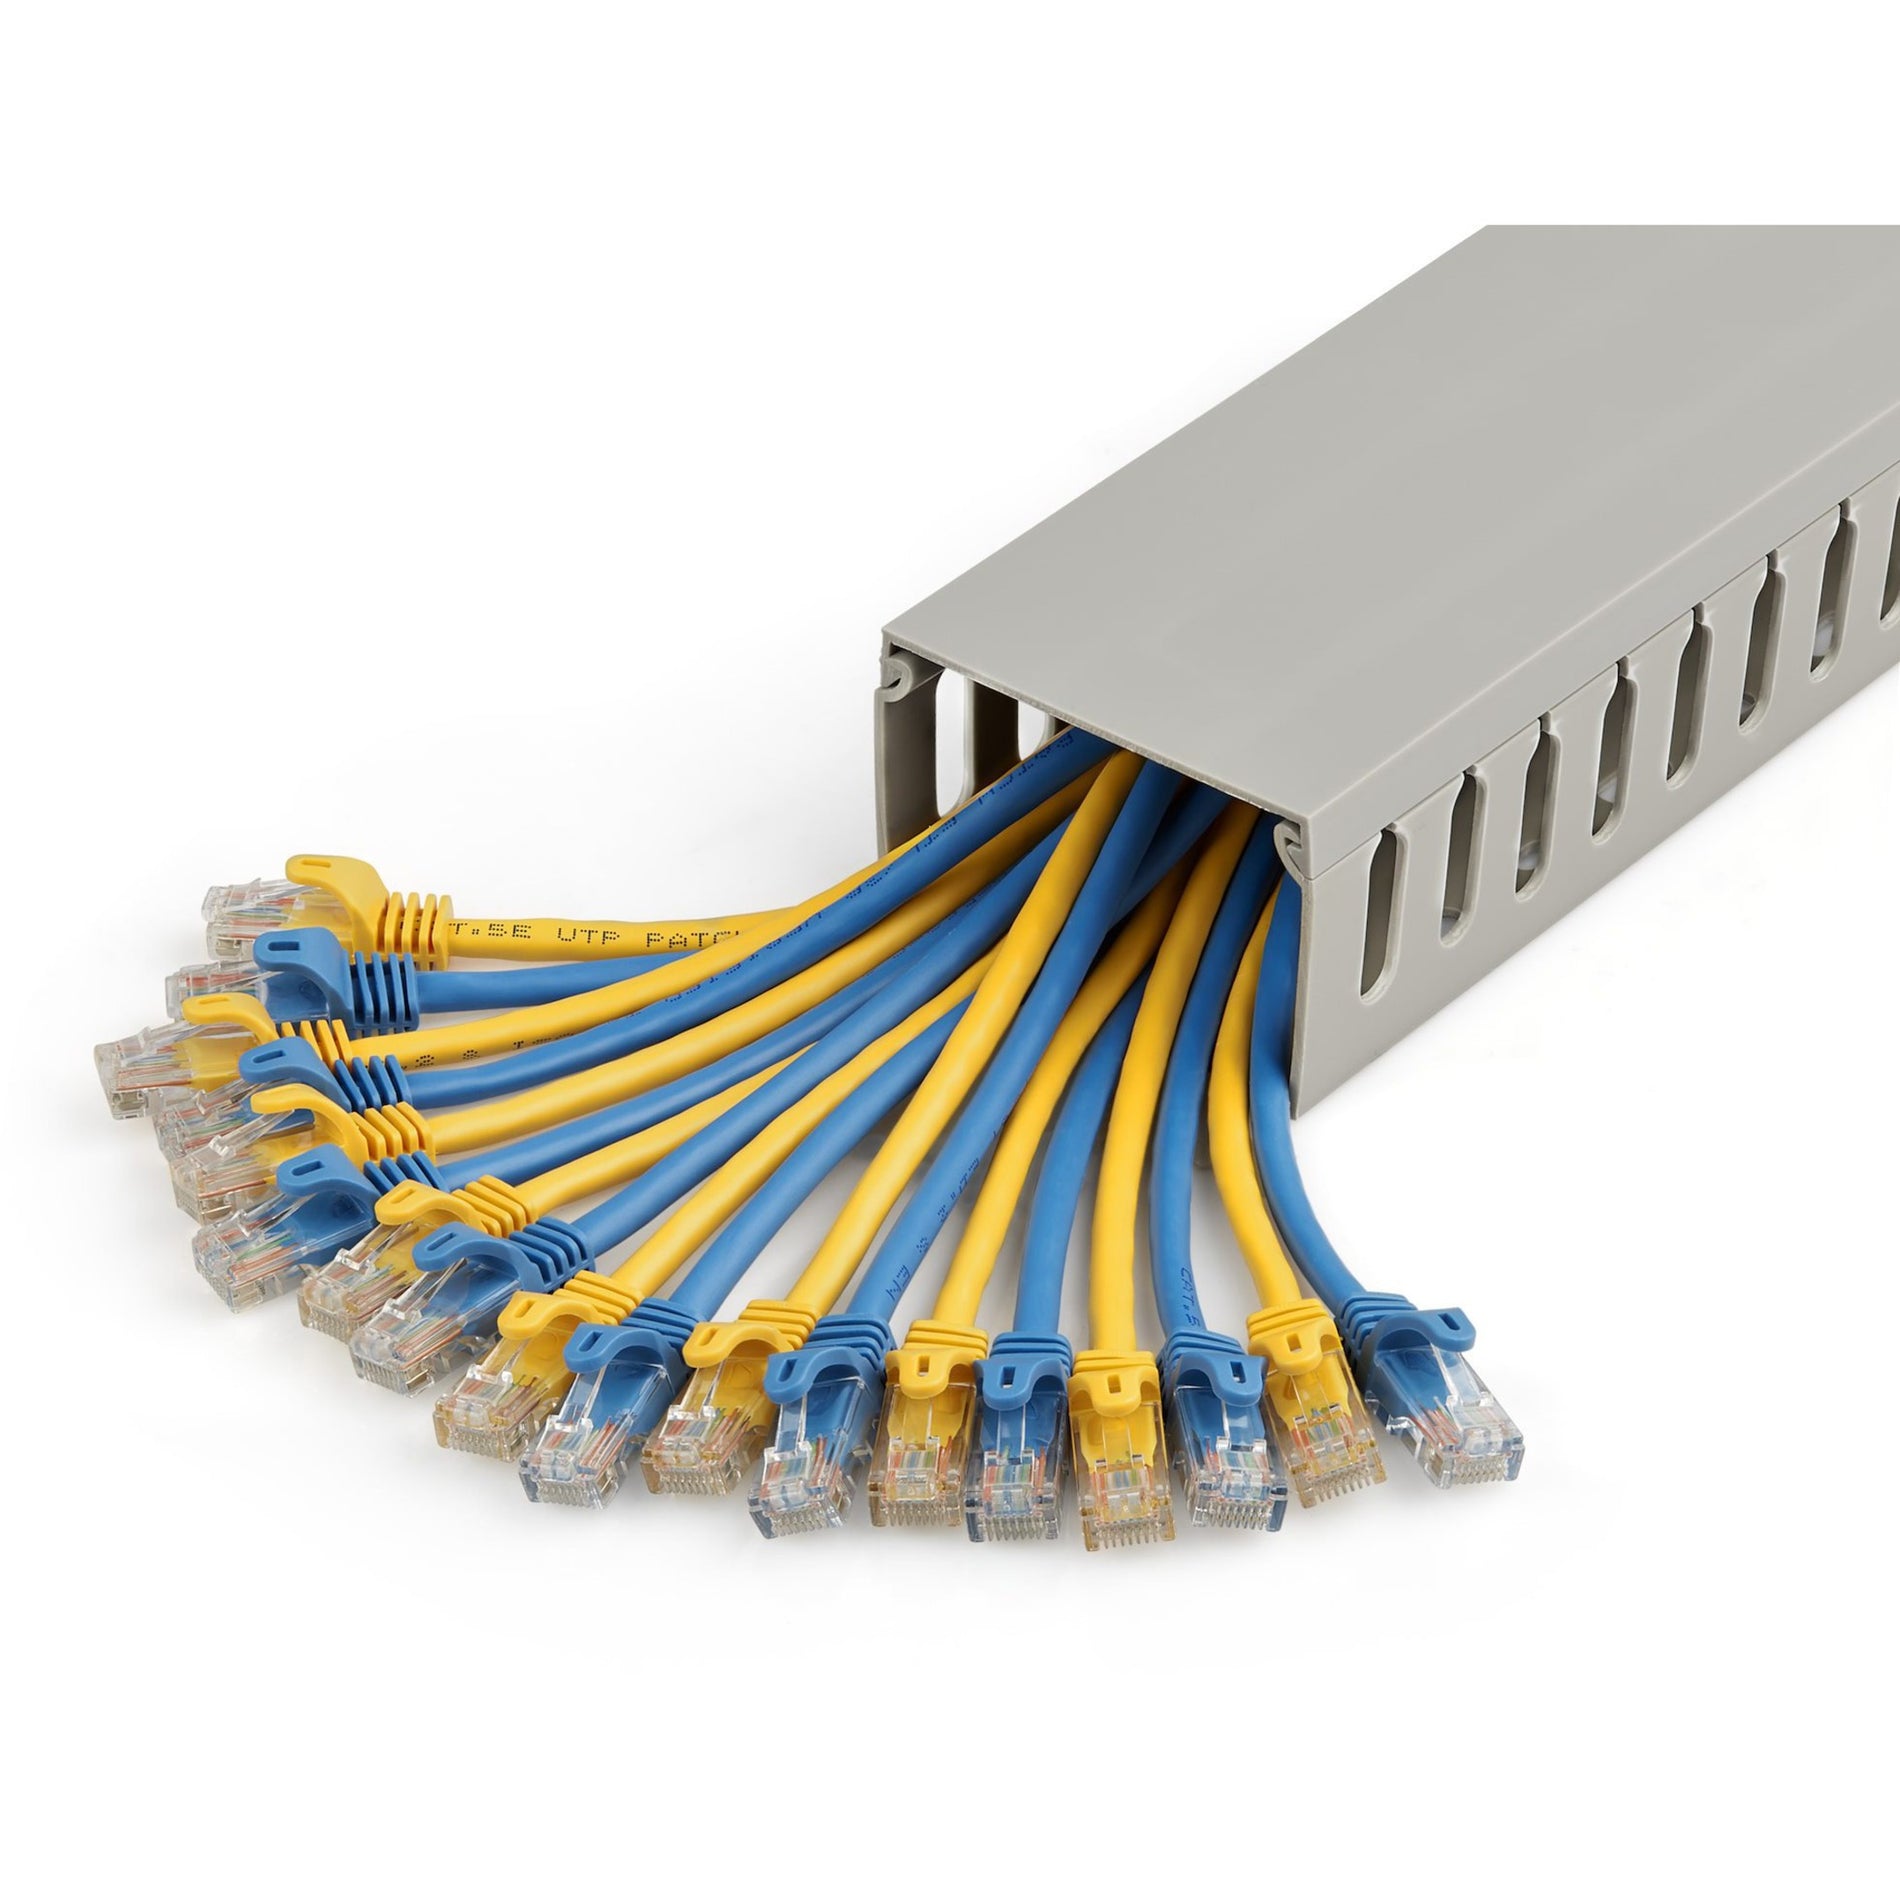 StarTech.com CBMWD7550 Cable Management Raceway, Slotted Wiring Duct - 75 x 50mm, TAA Compliant, Gray